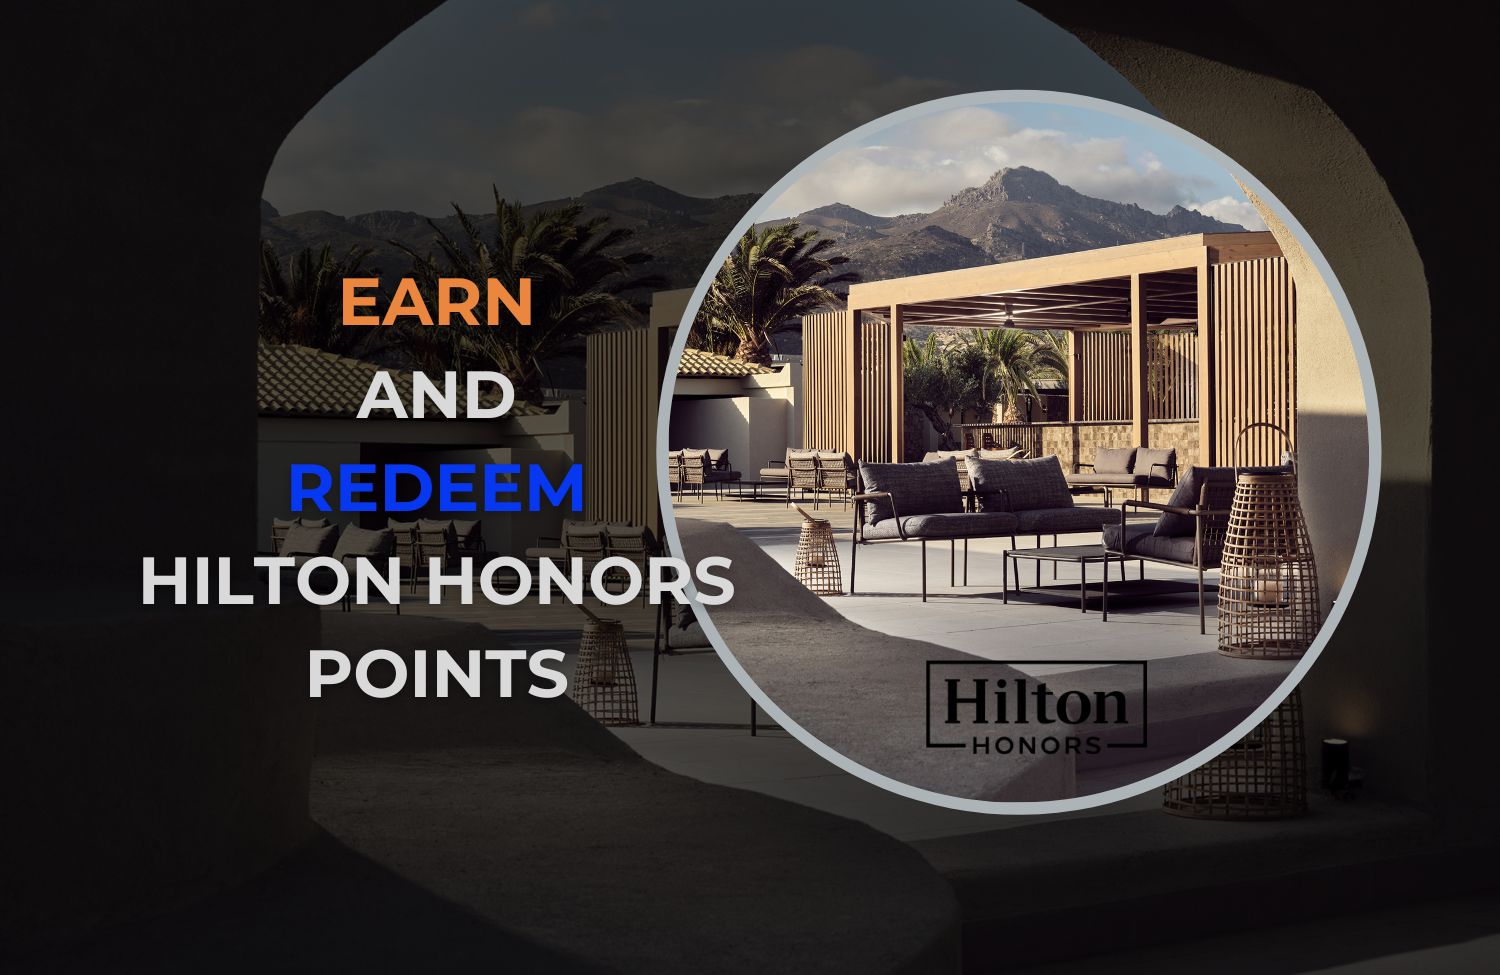 How to Earn and Redeem Hilton Honors Points